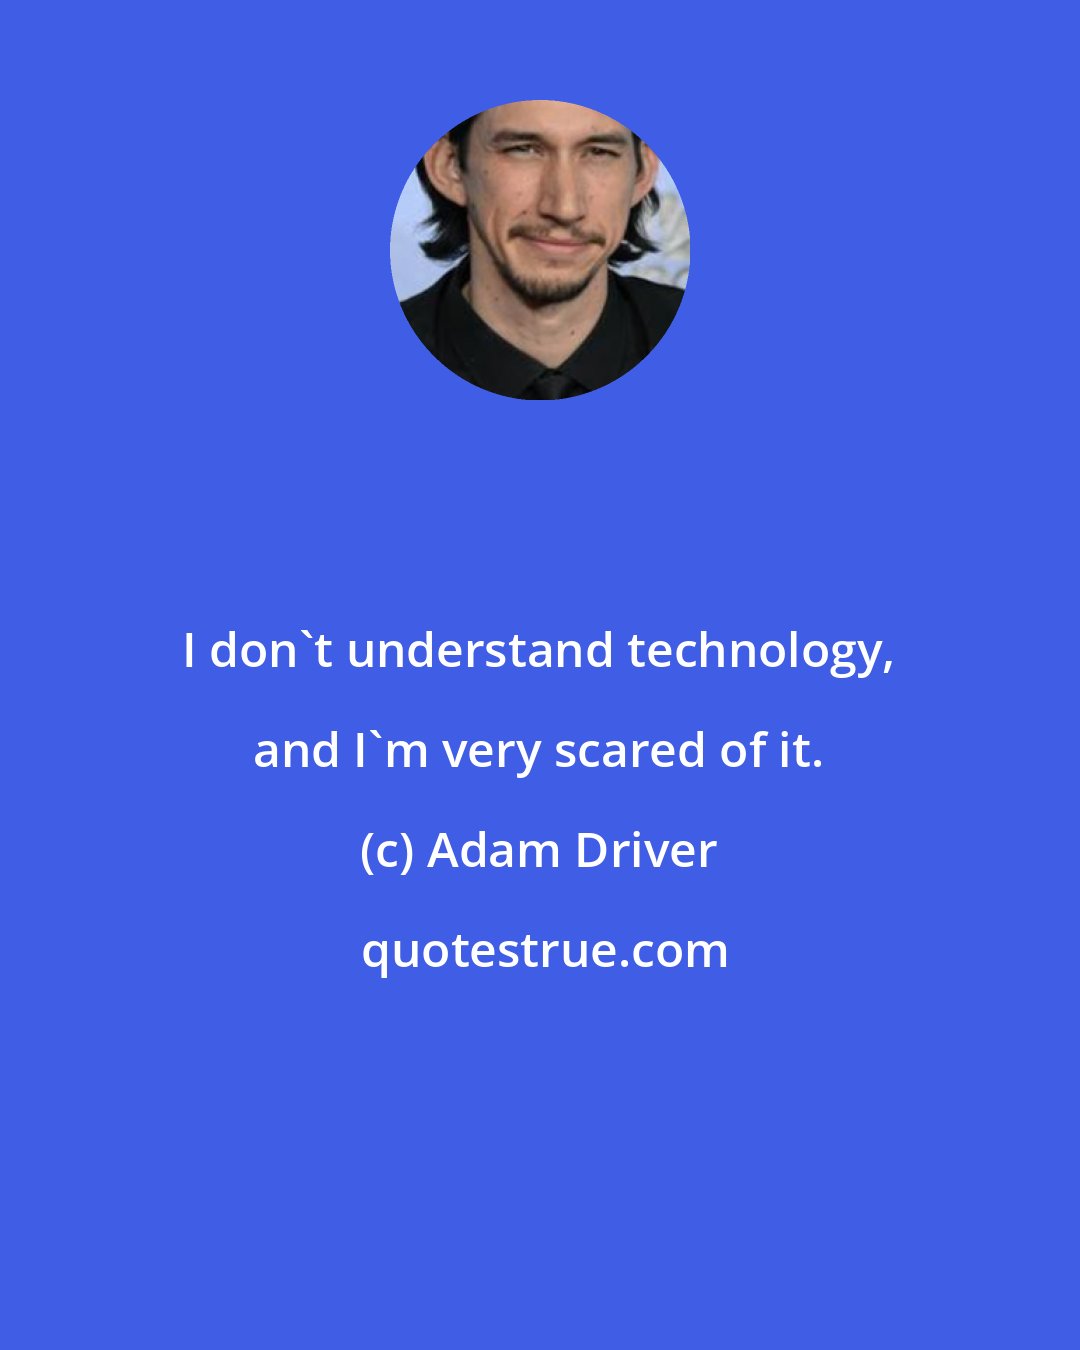 Adam Driver: I don't understand technology, and I'm very scared of it.